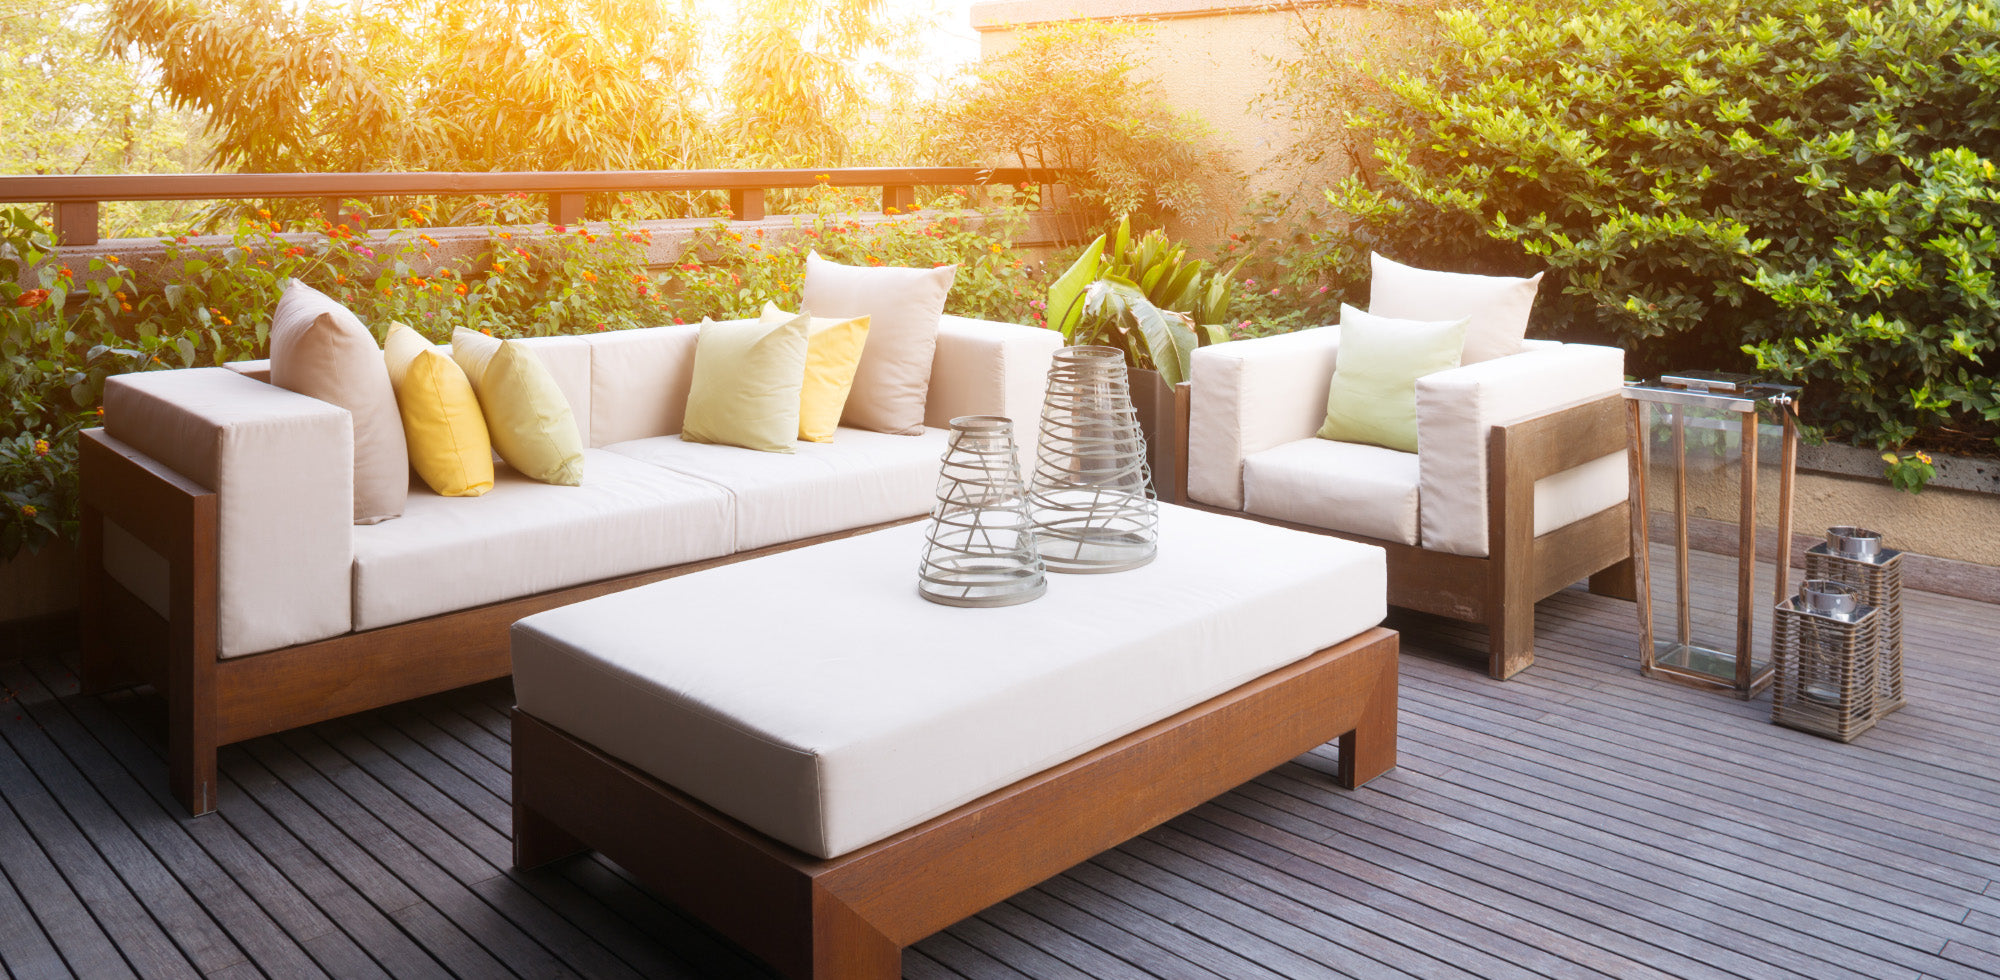 Oleophobic fabric coating for outdoor fabrics with added UV protection